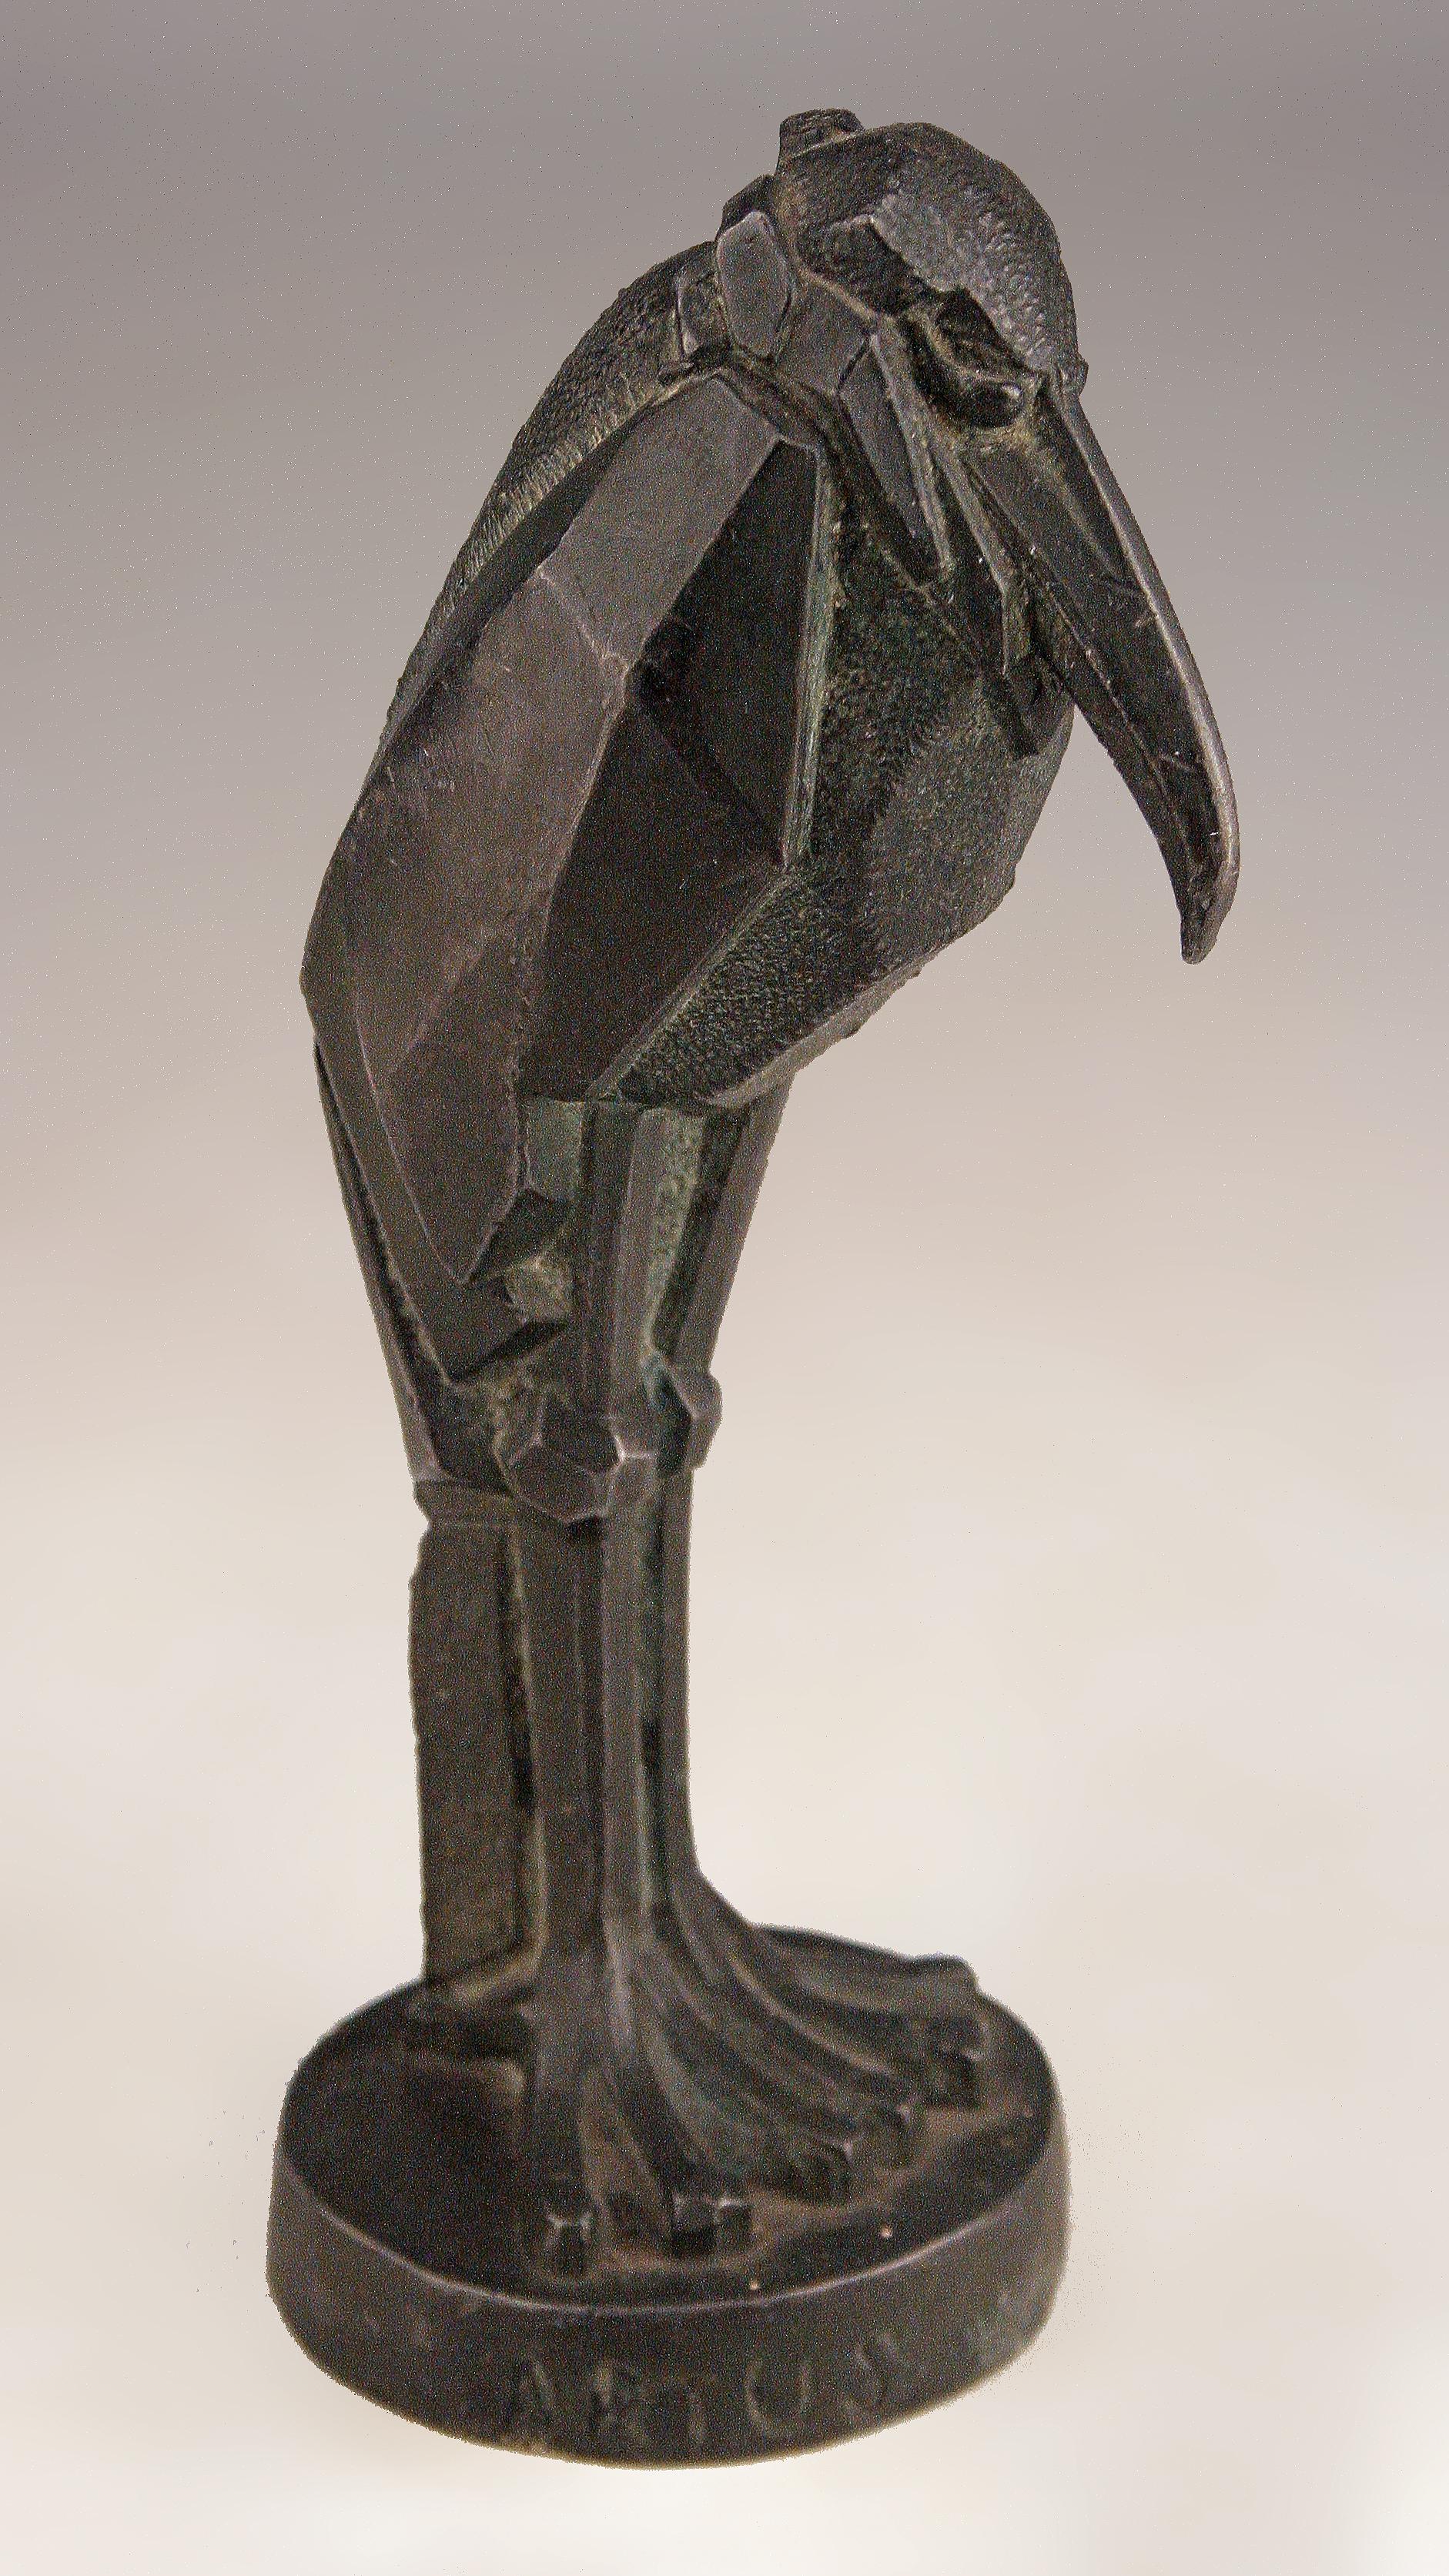 Molded Art Déco French Bronze Sculpture of an Standing Stork by Animalier Charles Artus For Sale